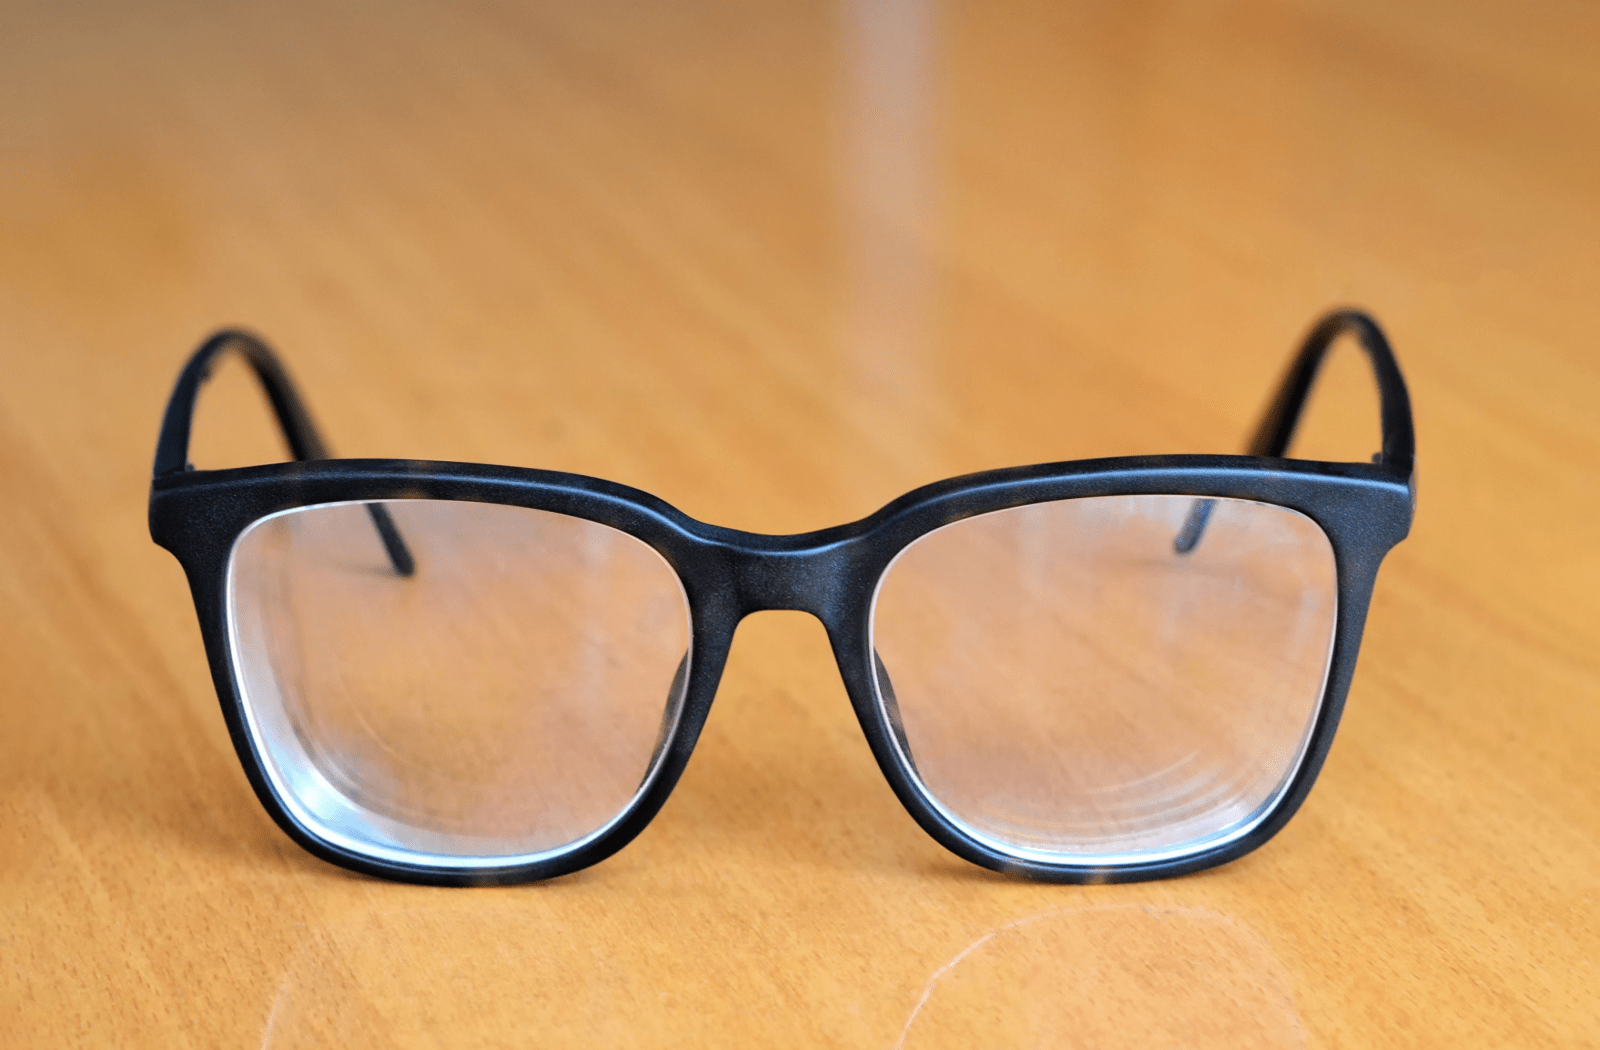 Glasses with thicker lenses, sitting on a wooden table